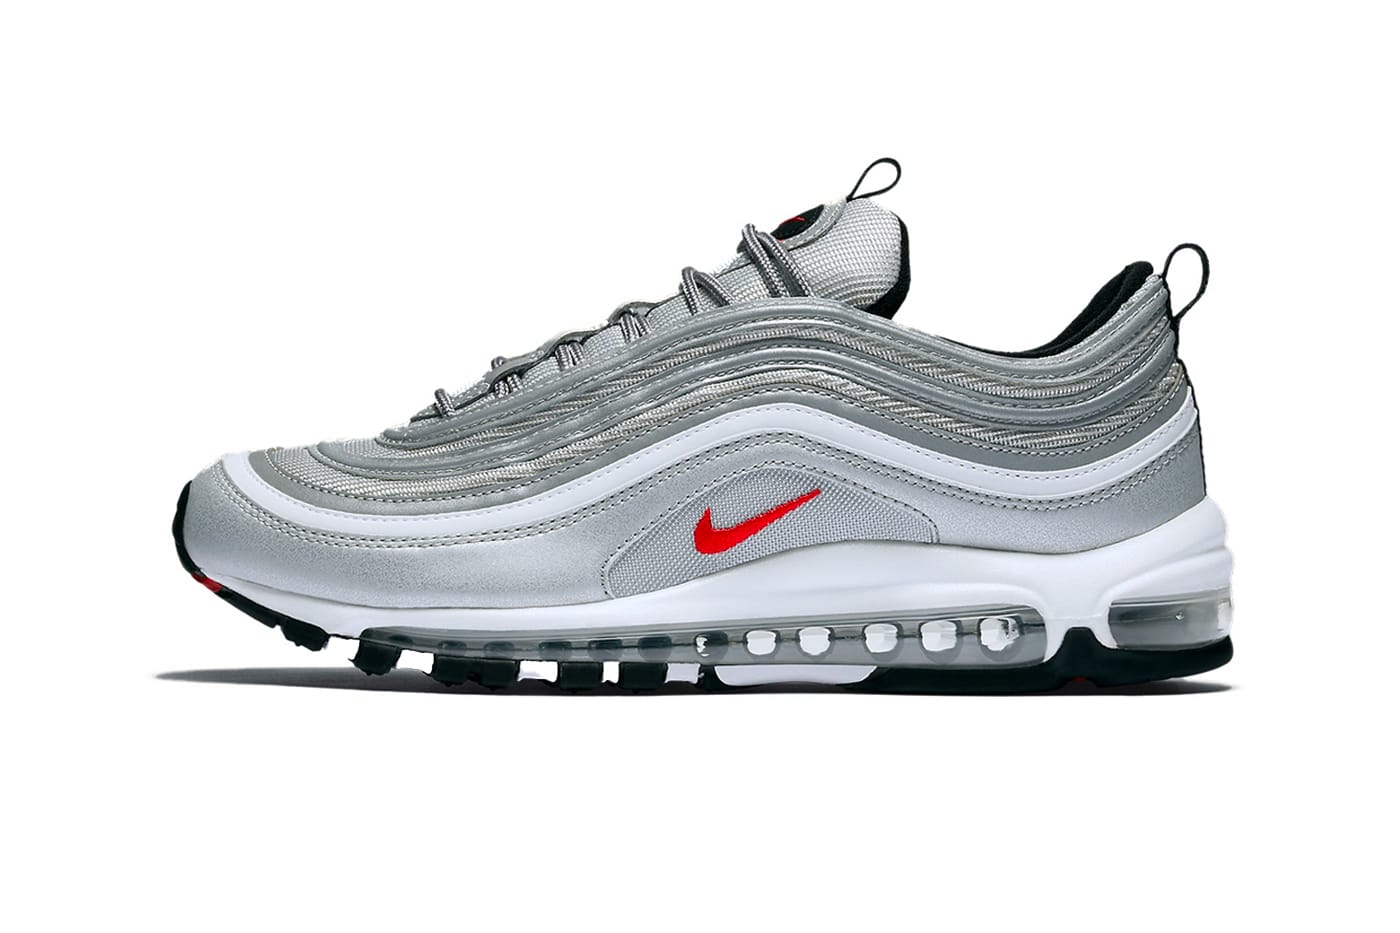 air max 97 blue and silver